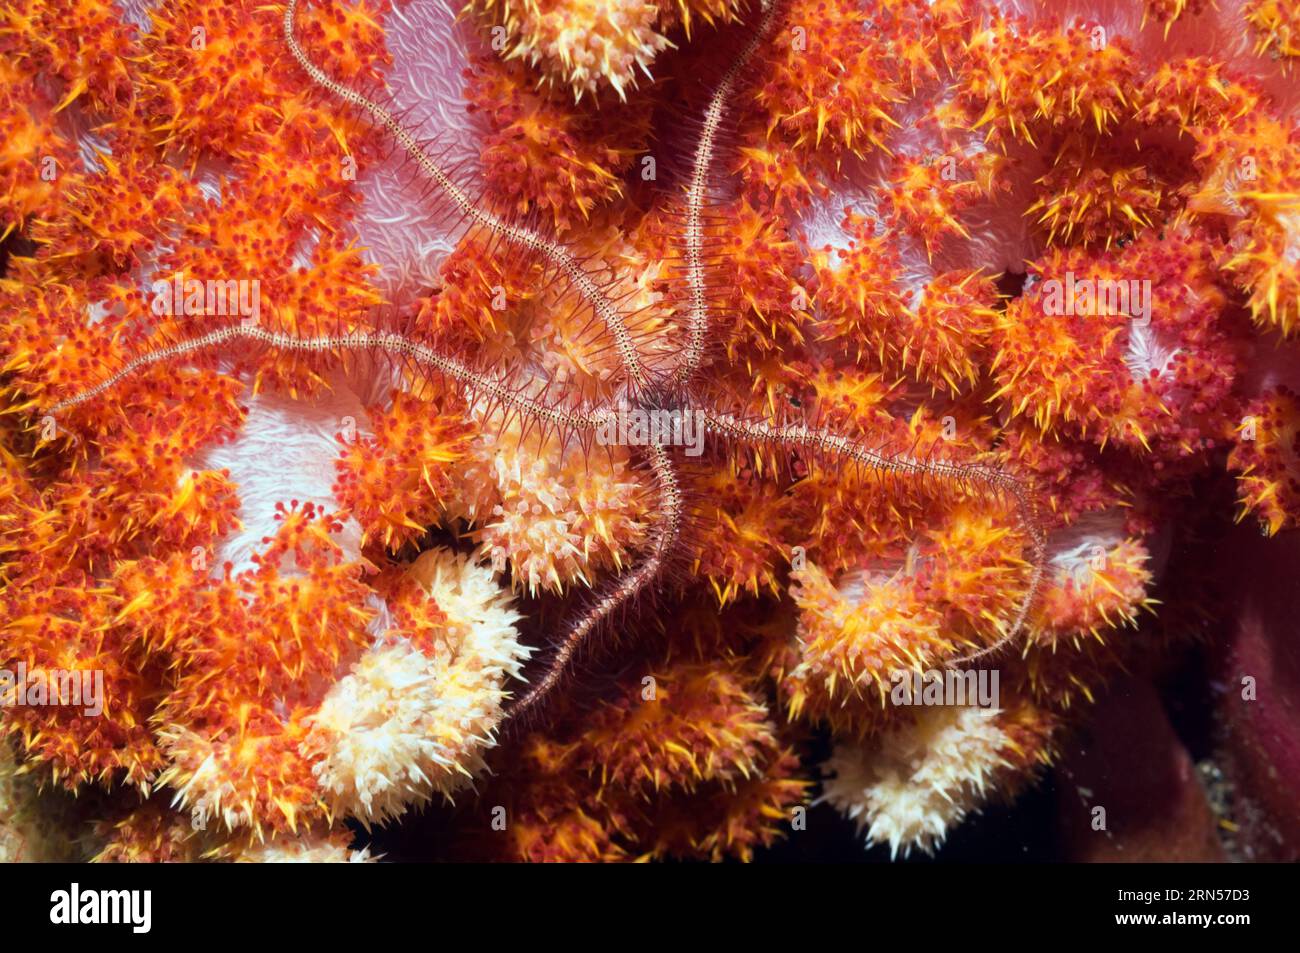 Brittlestar (Ophiothrix species) perched on soft coral.  Rinca, Komodo National Park, Indonesia. Stock Photo